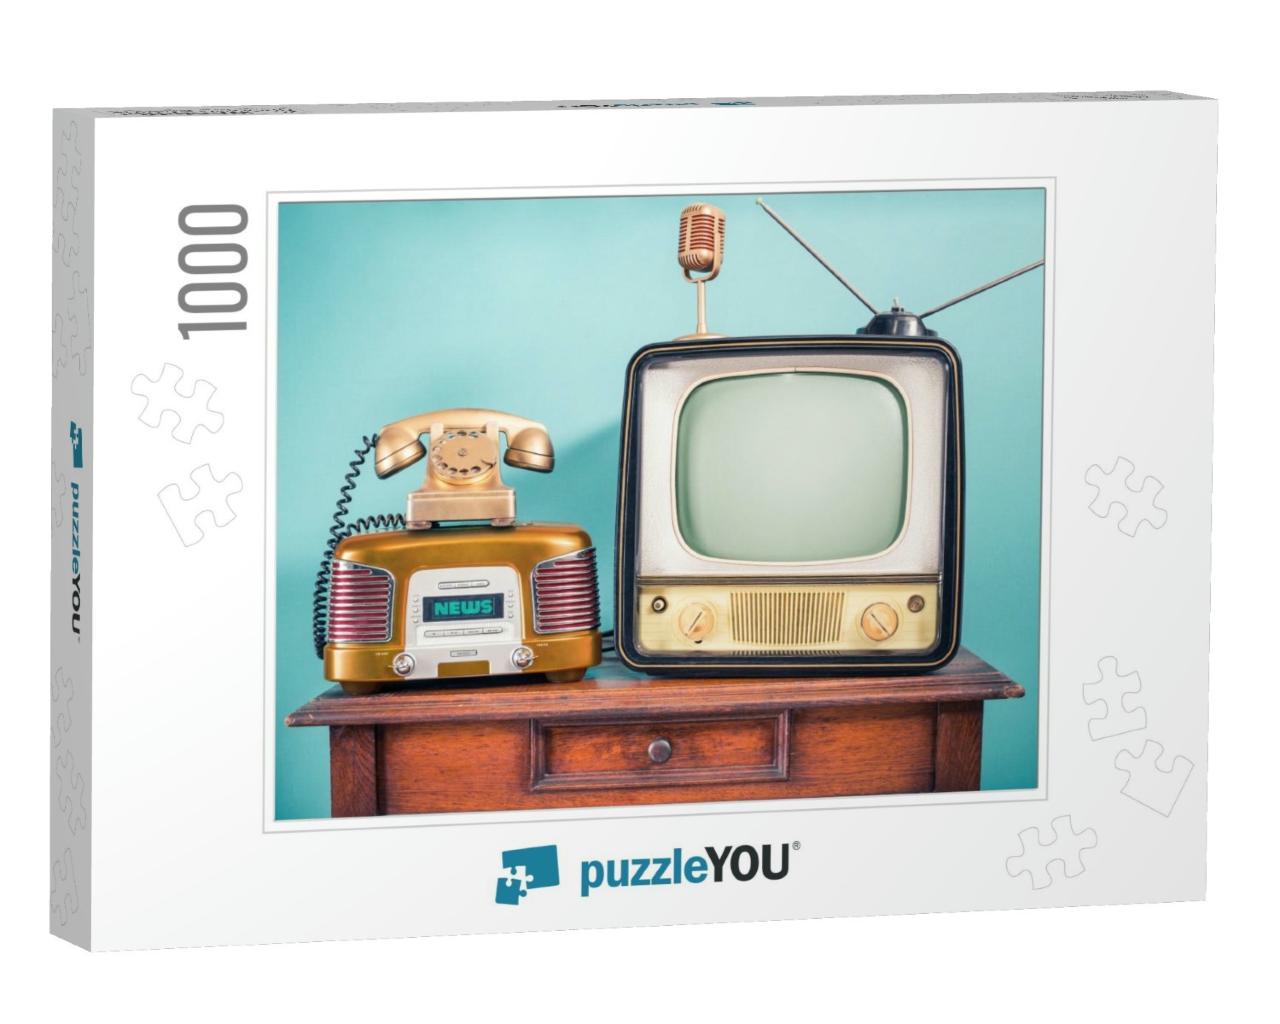 Retro Outdated Tv Set from 60s, Old Fm Radio, Golden Micr... Jigsaw Puzzle with 1000 pieces